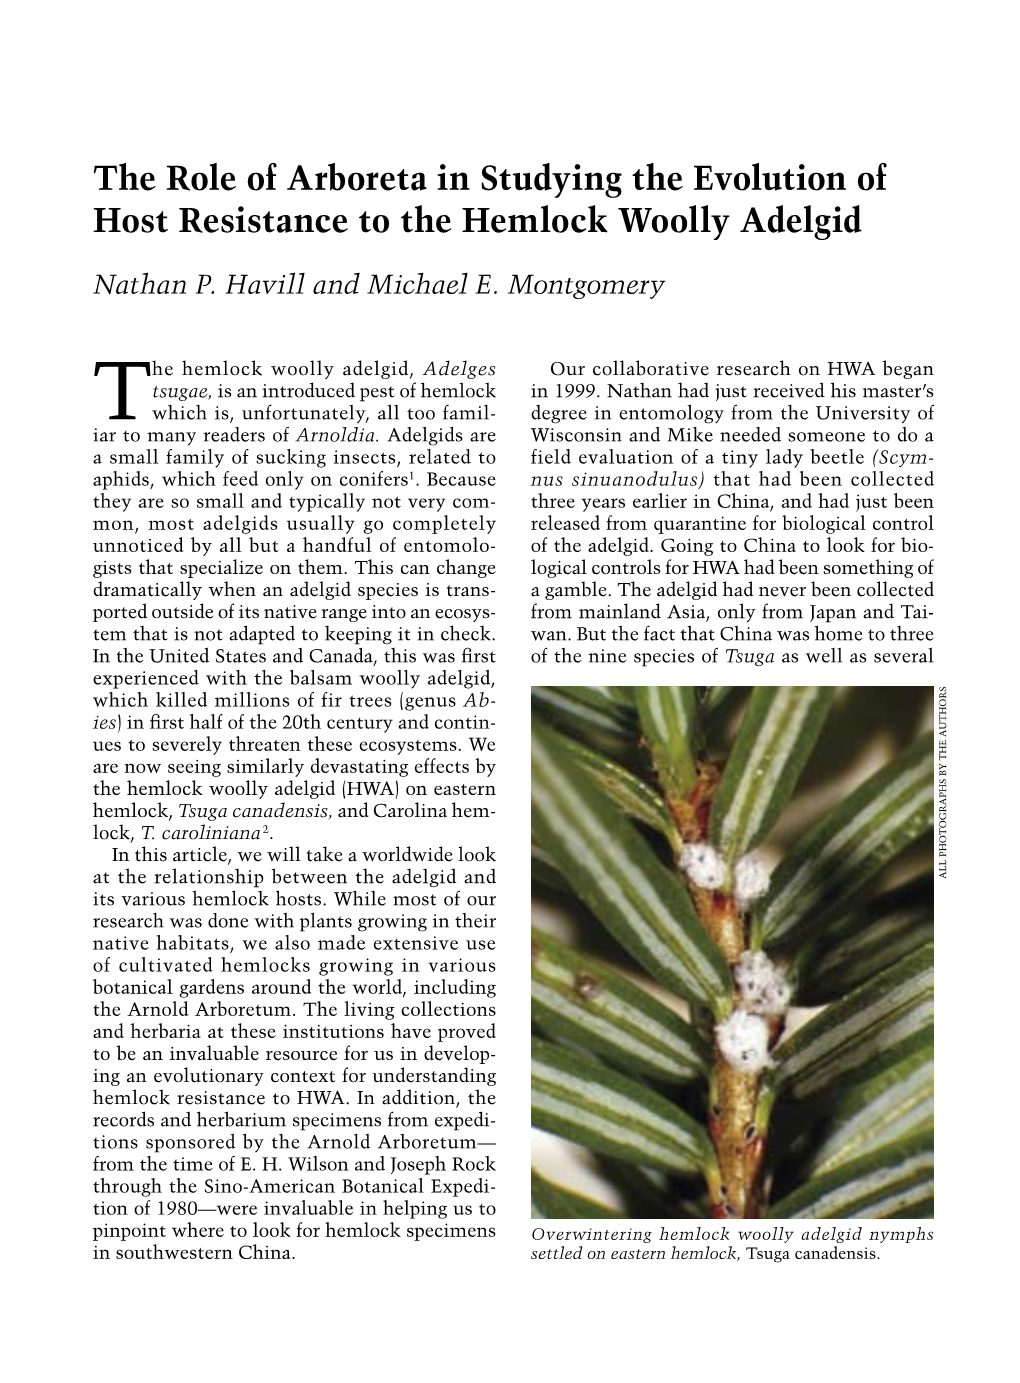 The Role of Arboreta in Studying the Evolution of Host Resistance to the Hemlock Woolly Adelgid